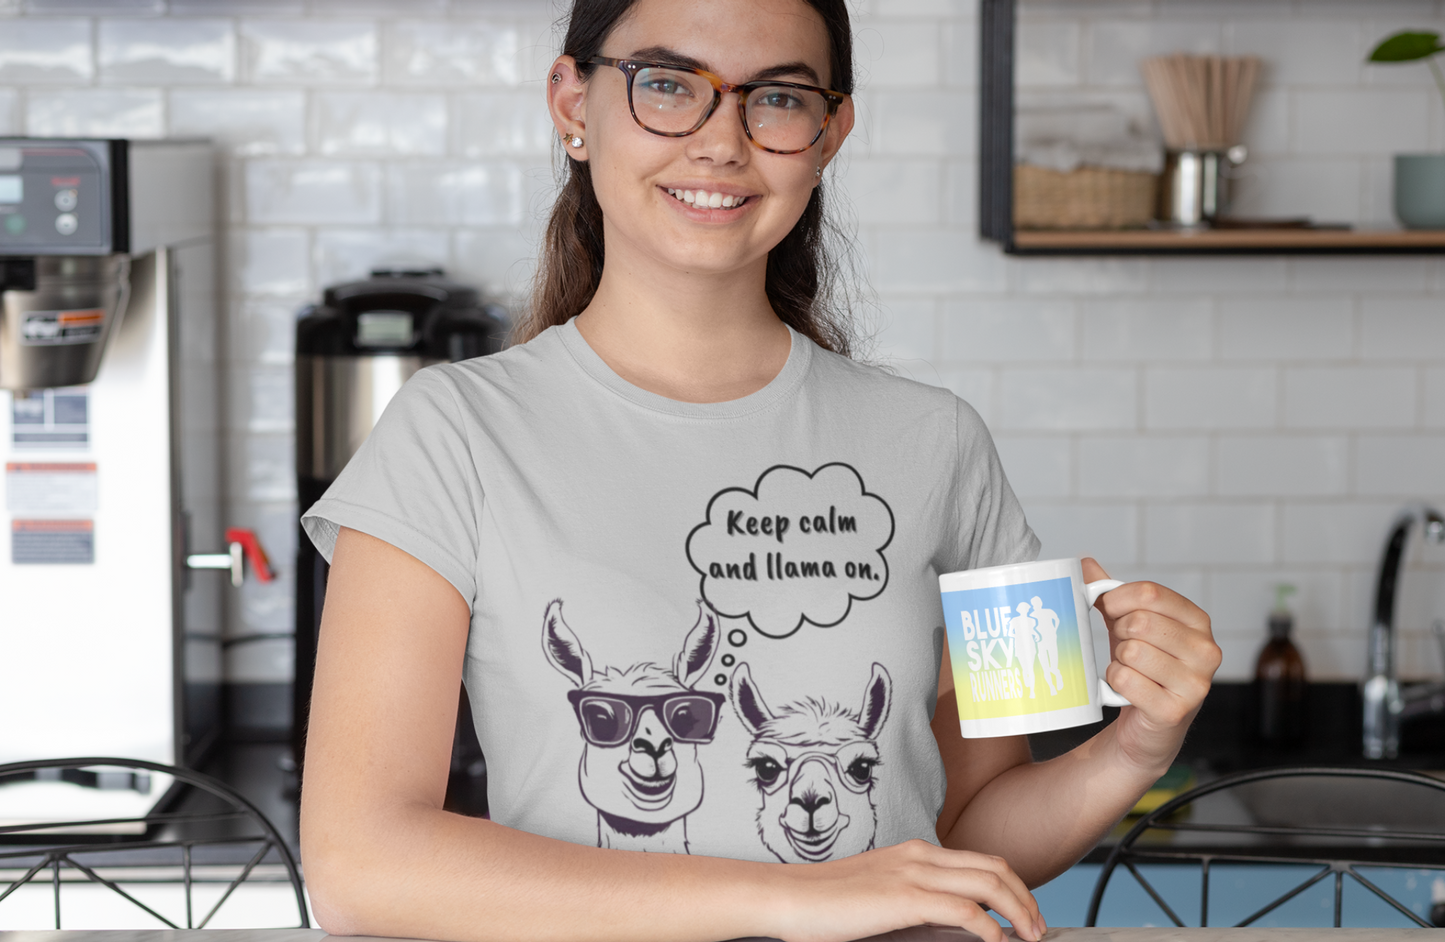 A woman wearing glasses and a comfortable grey Printify Keep Calm and Llama On - Tri-Blend Crew Tee - Unisex Fit smiles while holding a mug that says "Blue Sky Coffee." She stands in a modern kitchen with white subway tiles and coffee-making equipment in the background.